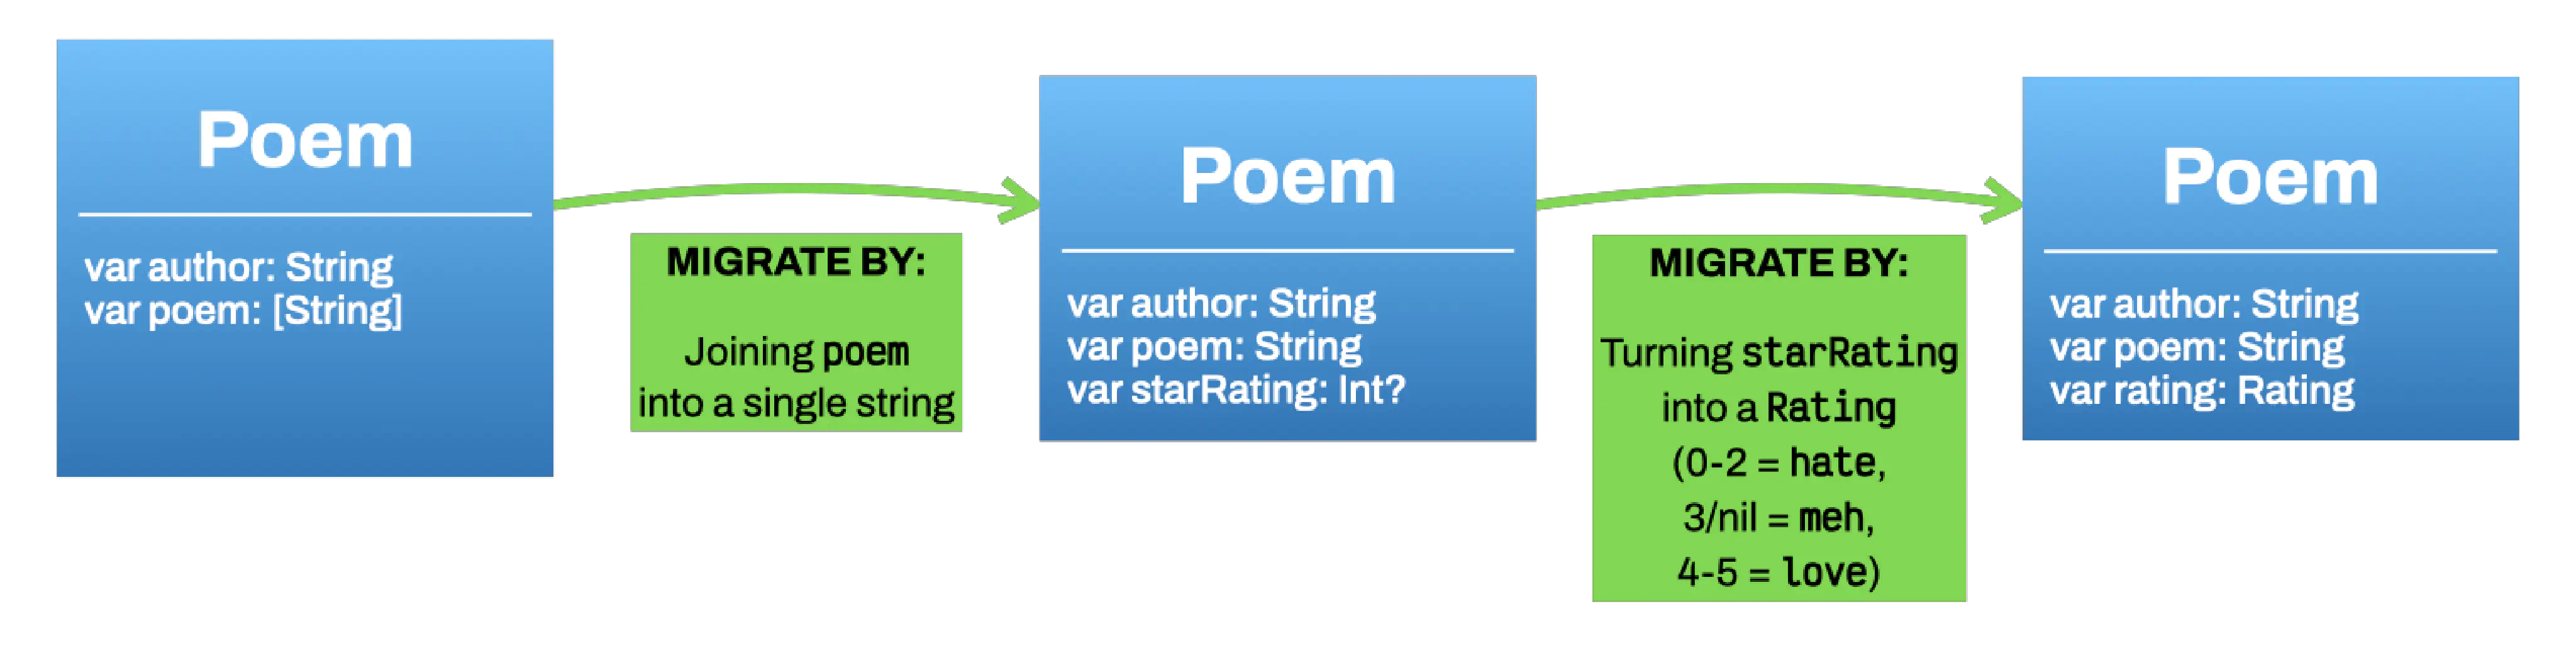 The three Poem types linked by green arrows. To get from the first to the second, you migrate by joining the Poem field into a single string. To get from the second to the third, you turn starRating into a Rating (from 0-2 make it ‘hate’, for 3 or nil set it to ‘meh’, and for 4-5 set it to ‘love’.)